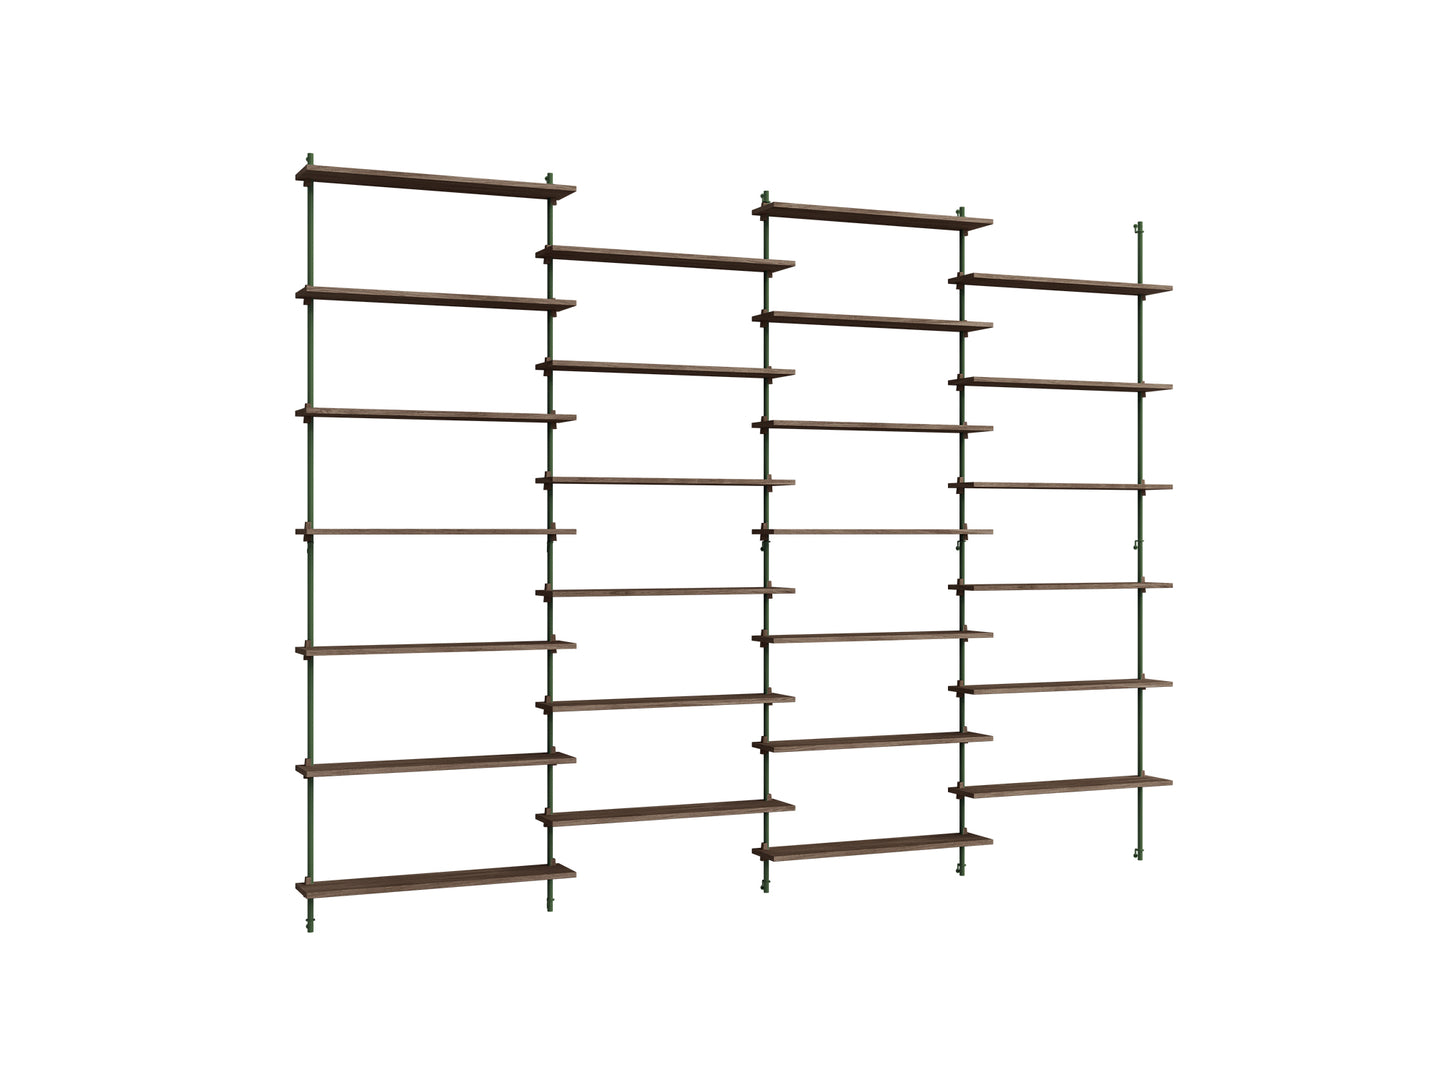 Wall Shelving System Sets (230 cm) by Moebe - WS.230.4 / Pine Green Uprights / Smoked Oak